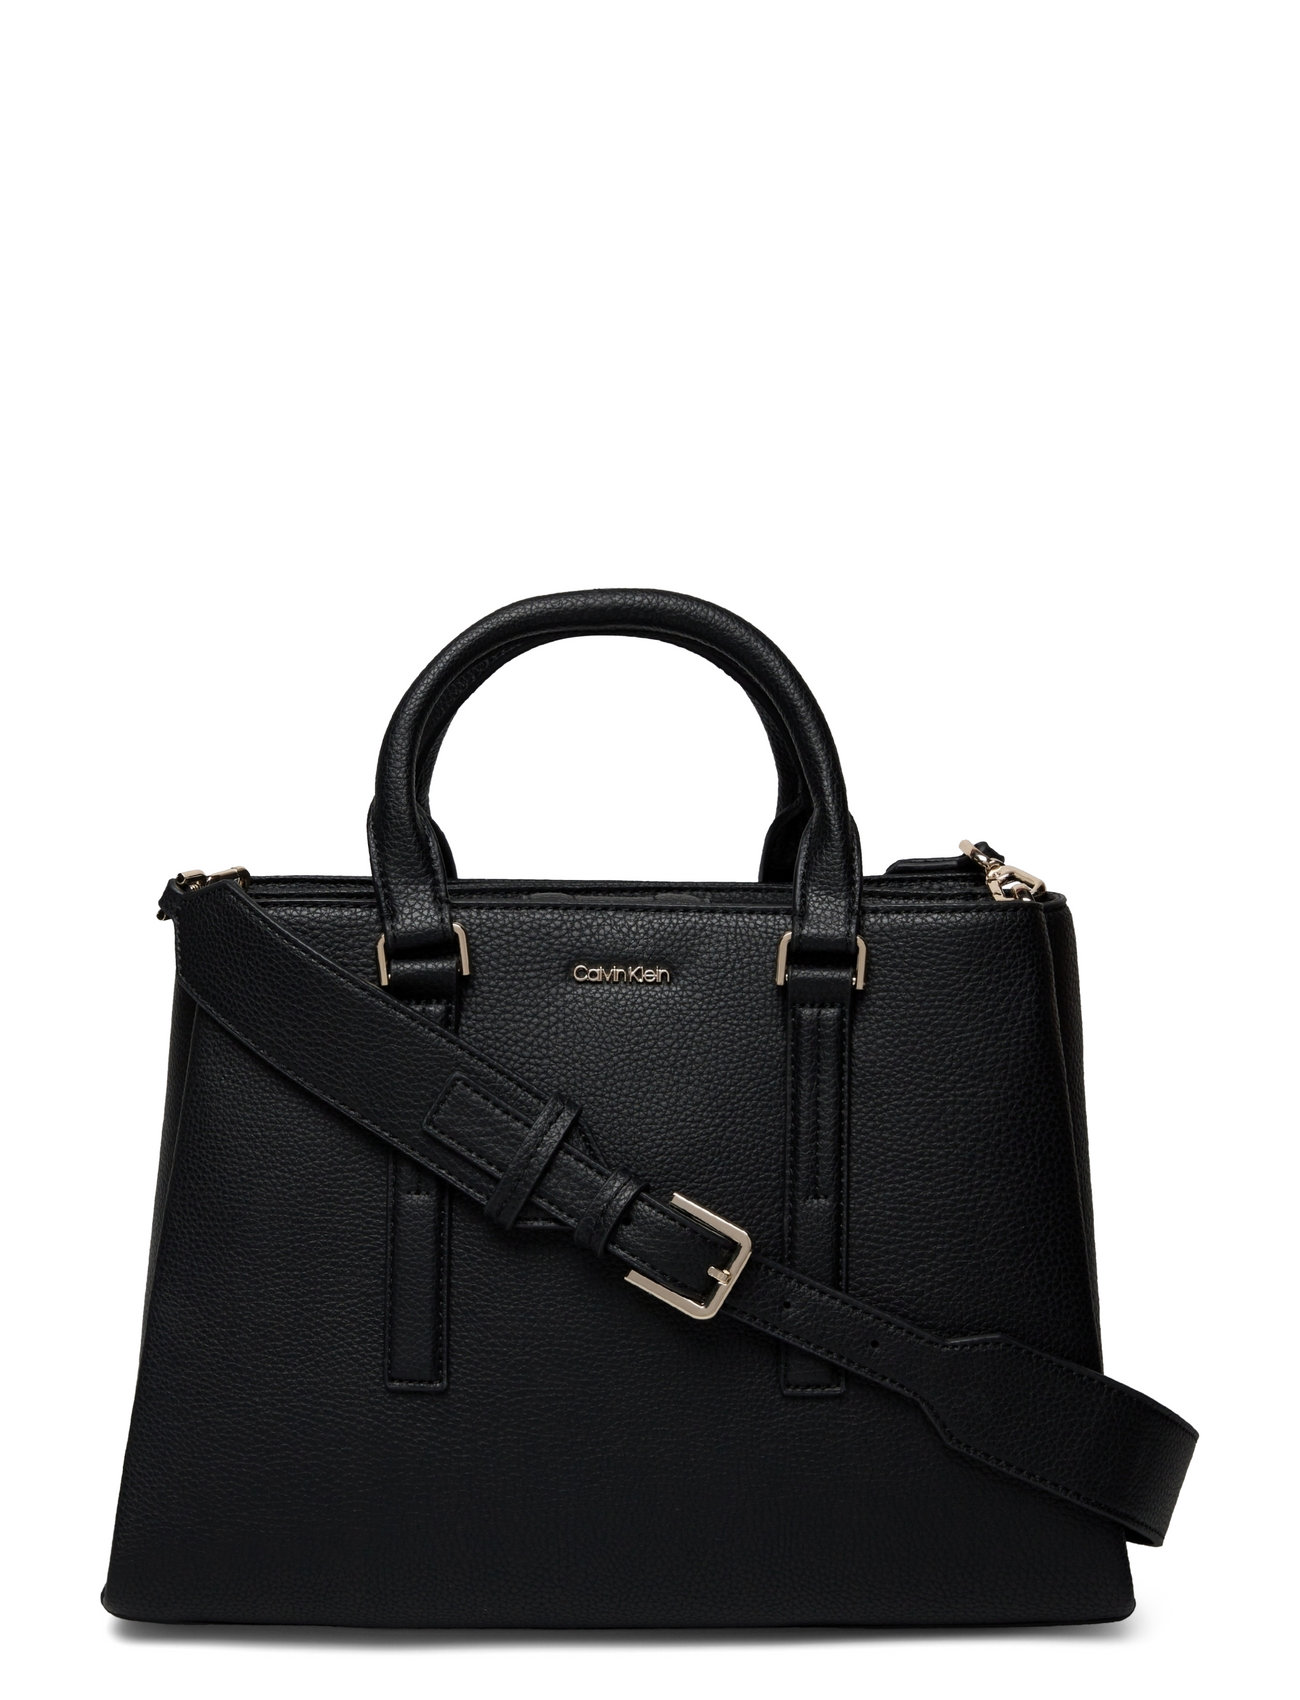 Calvin Klein Ck Elevated Tote Md - Shoulder bags - Boozt.com